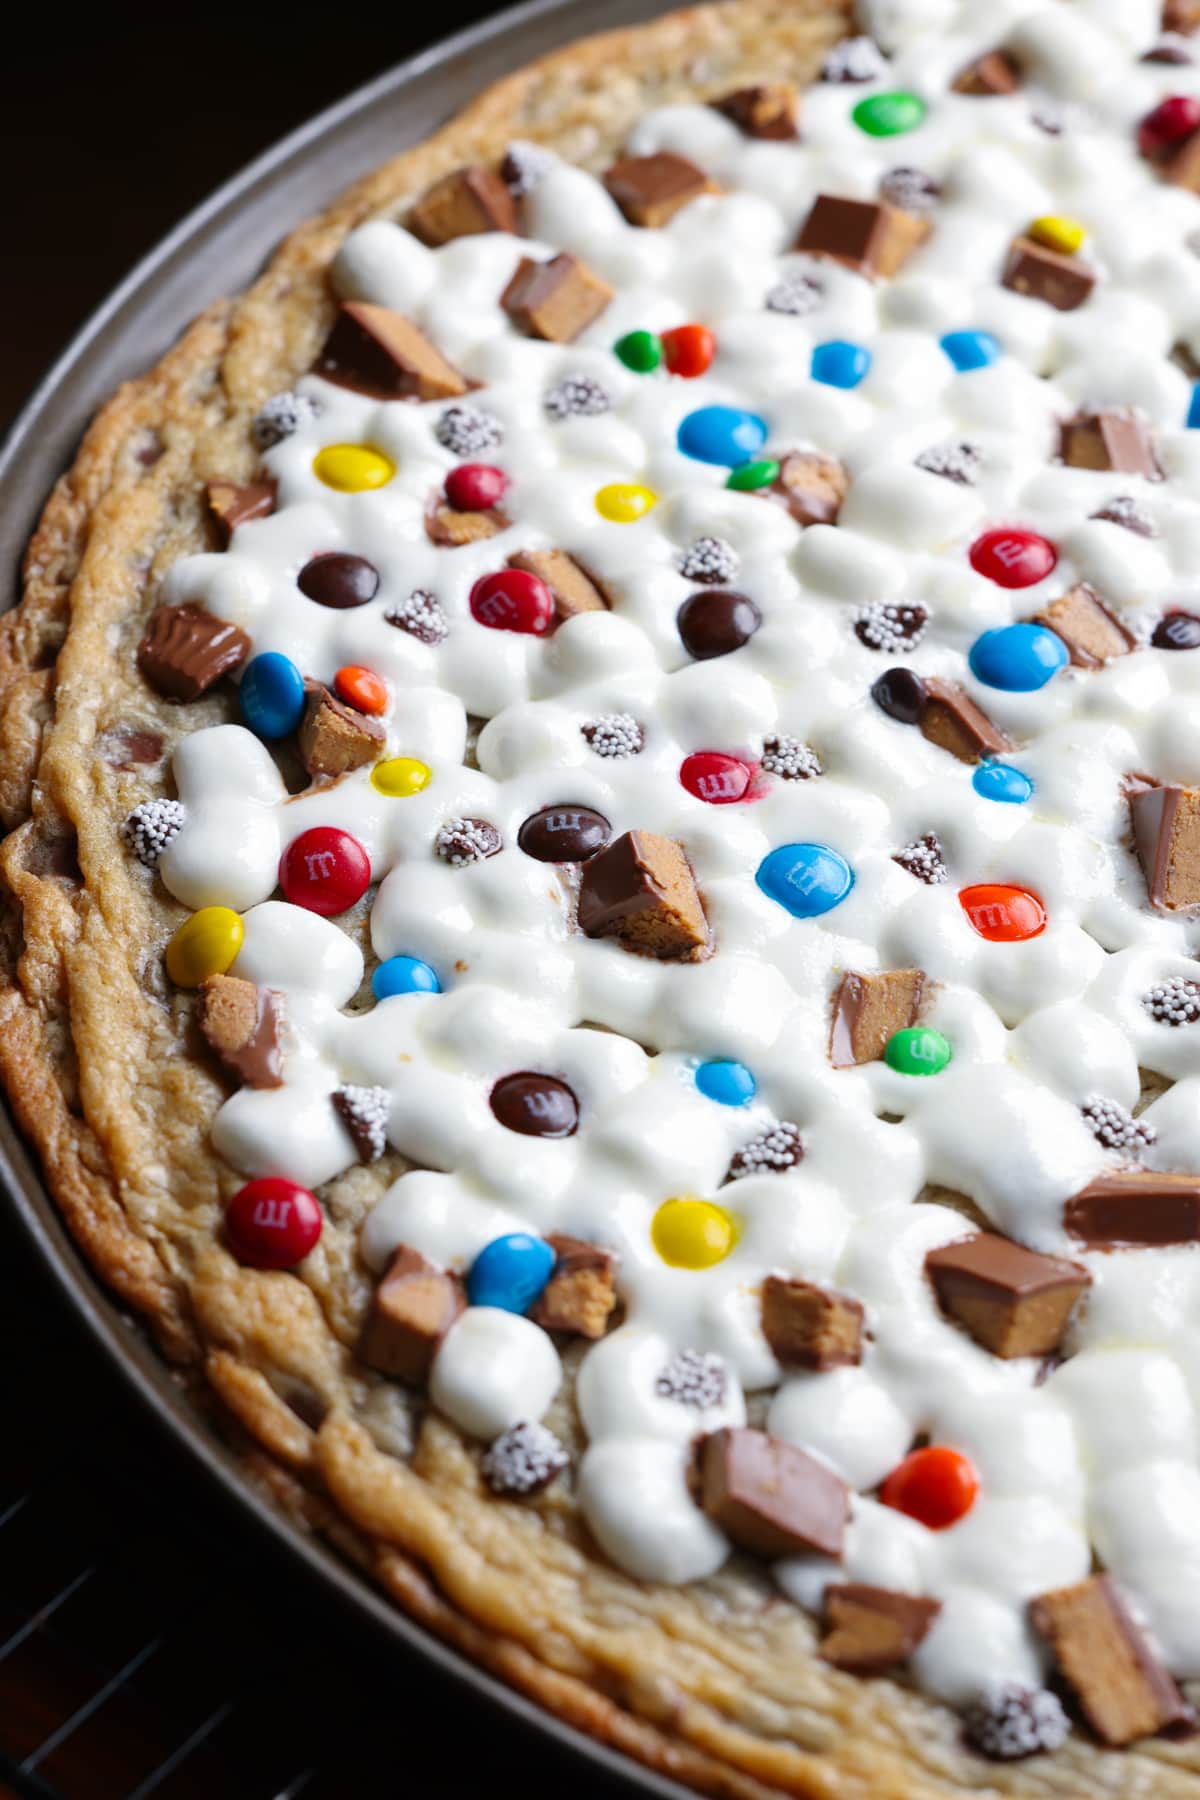 A giant chocolate chip cookie baked in a pizza pan topped with gooey melted marshmallows